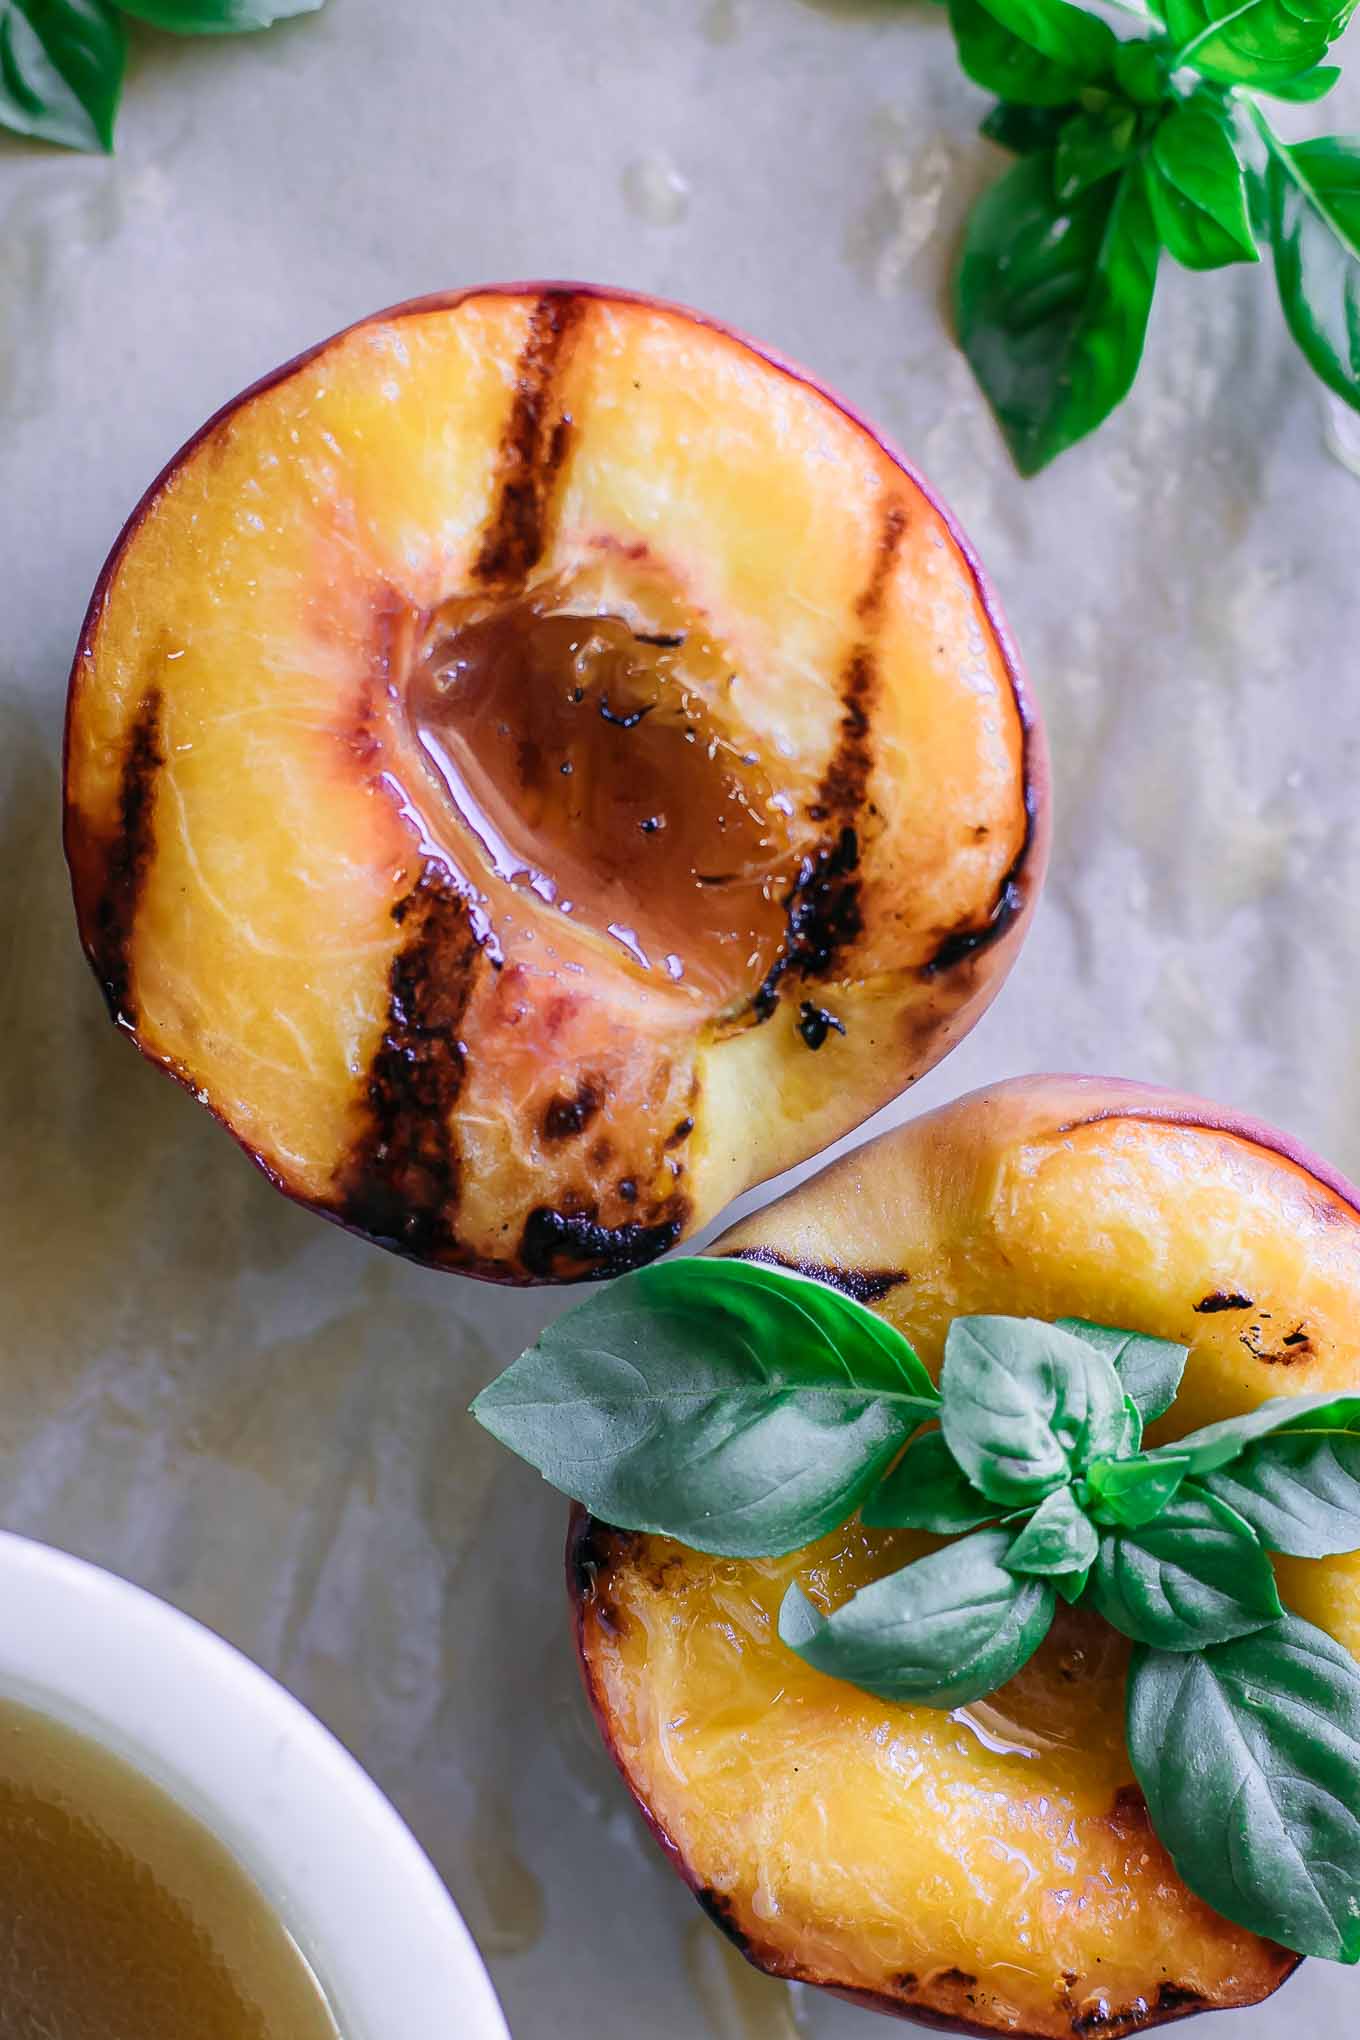 grilled peaches on a wood table